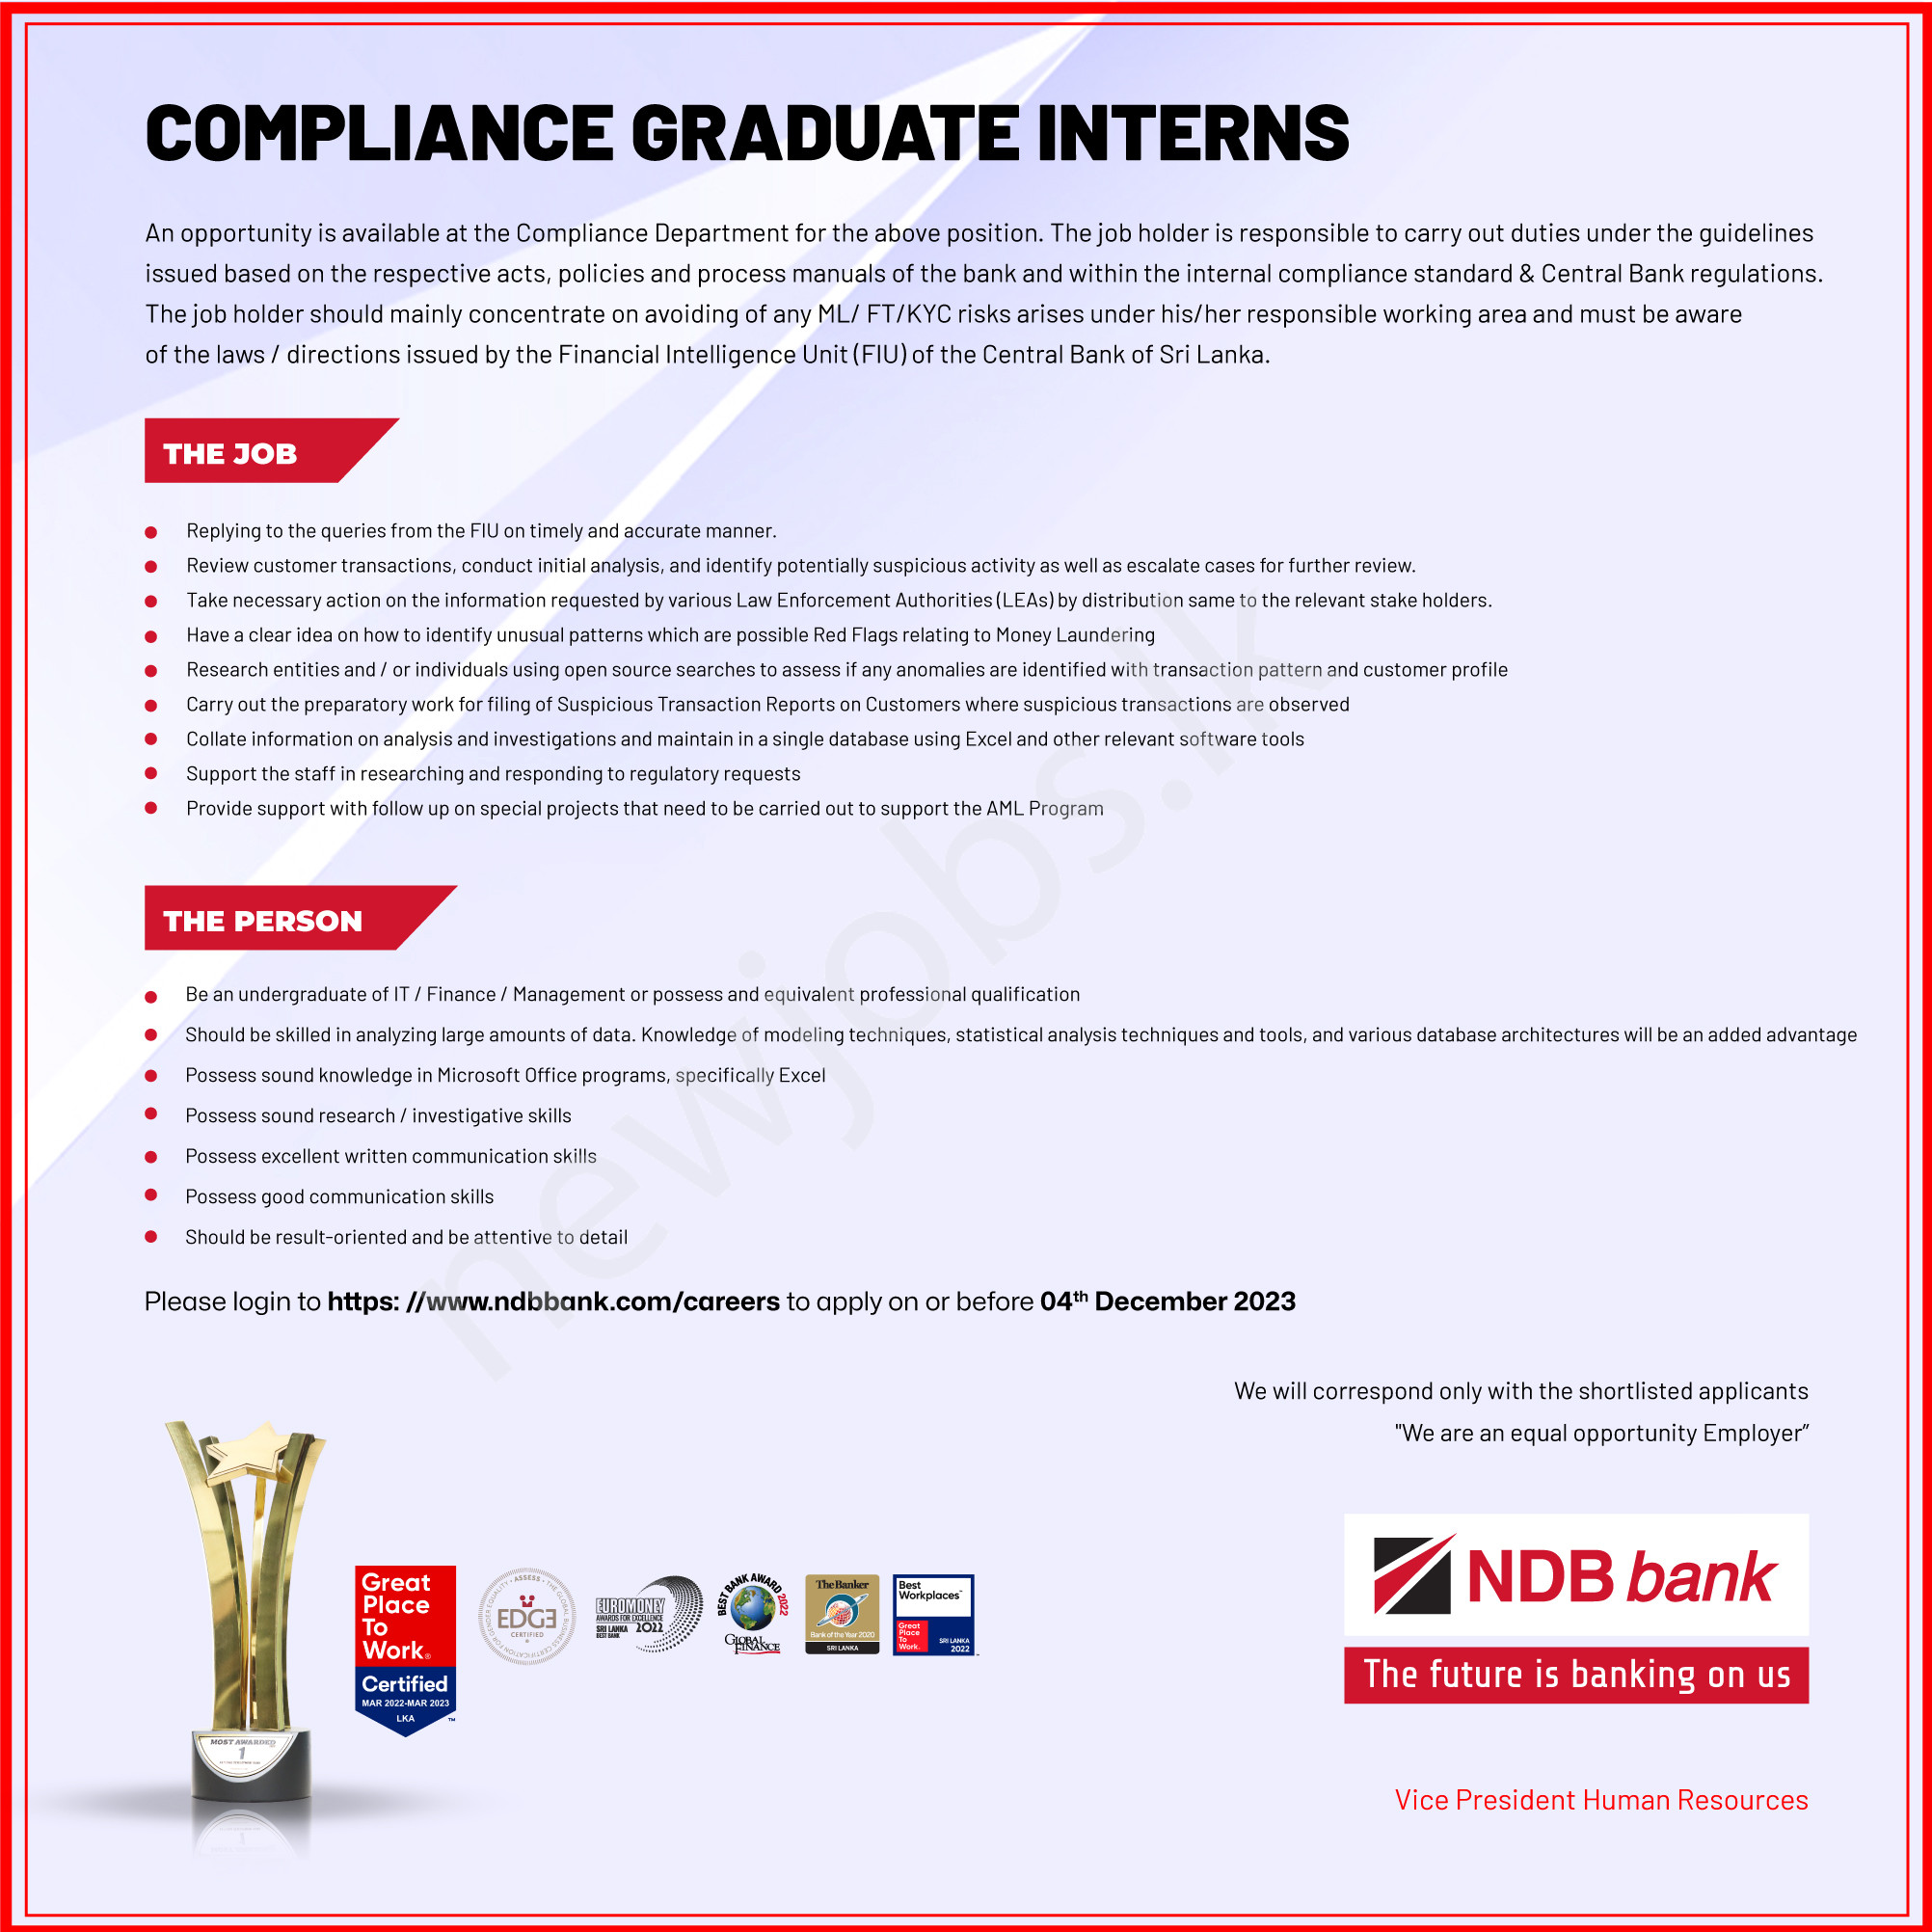 You are currently viewing Compliance Graduate Interns